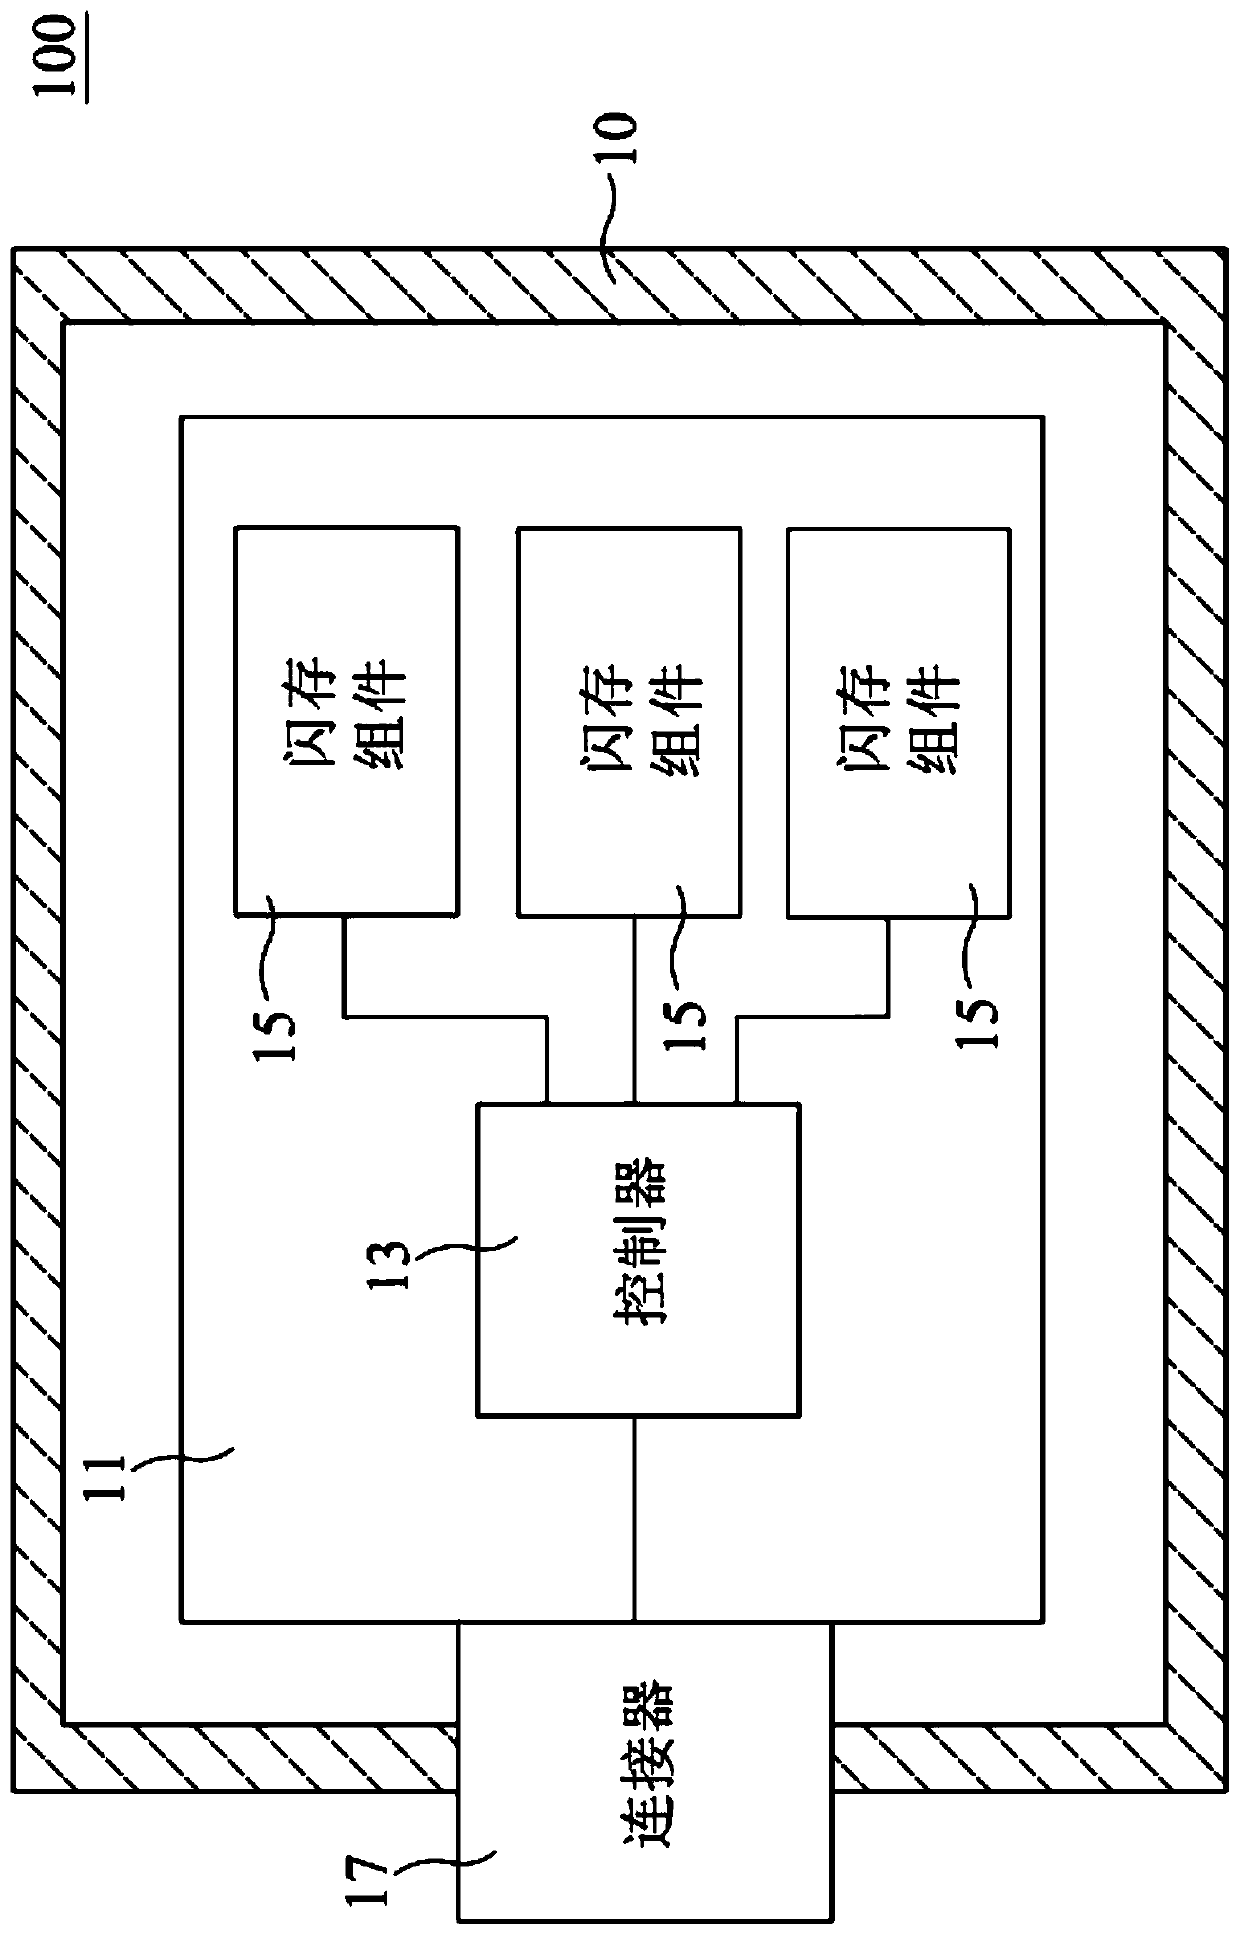 Data storage device with thermal protection